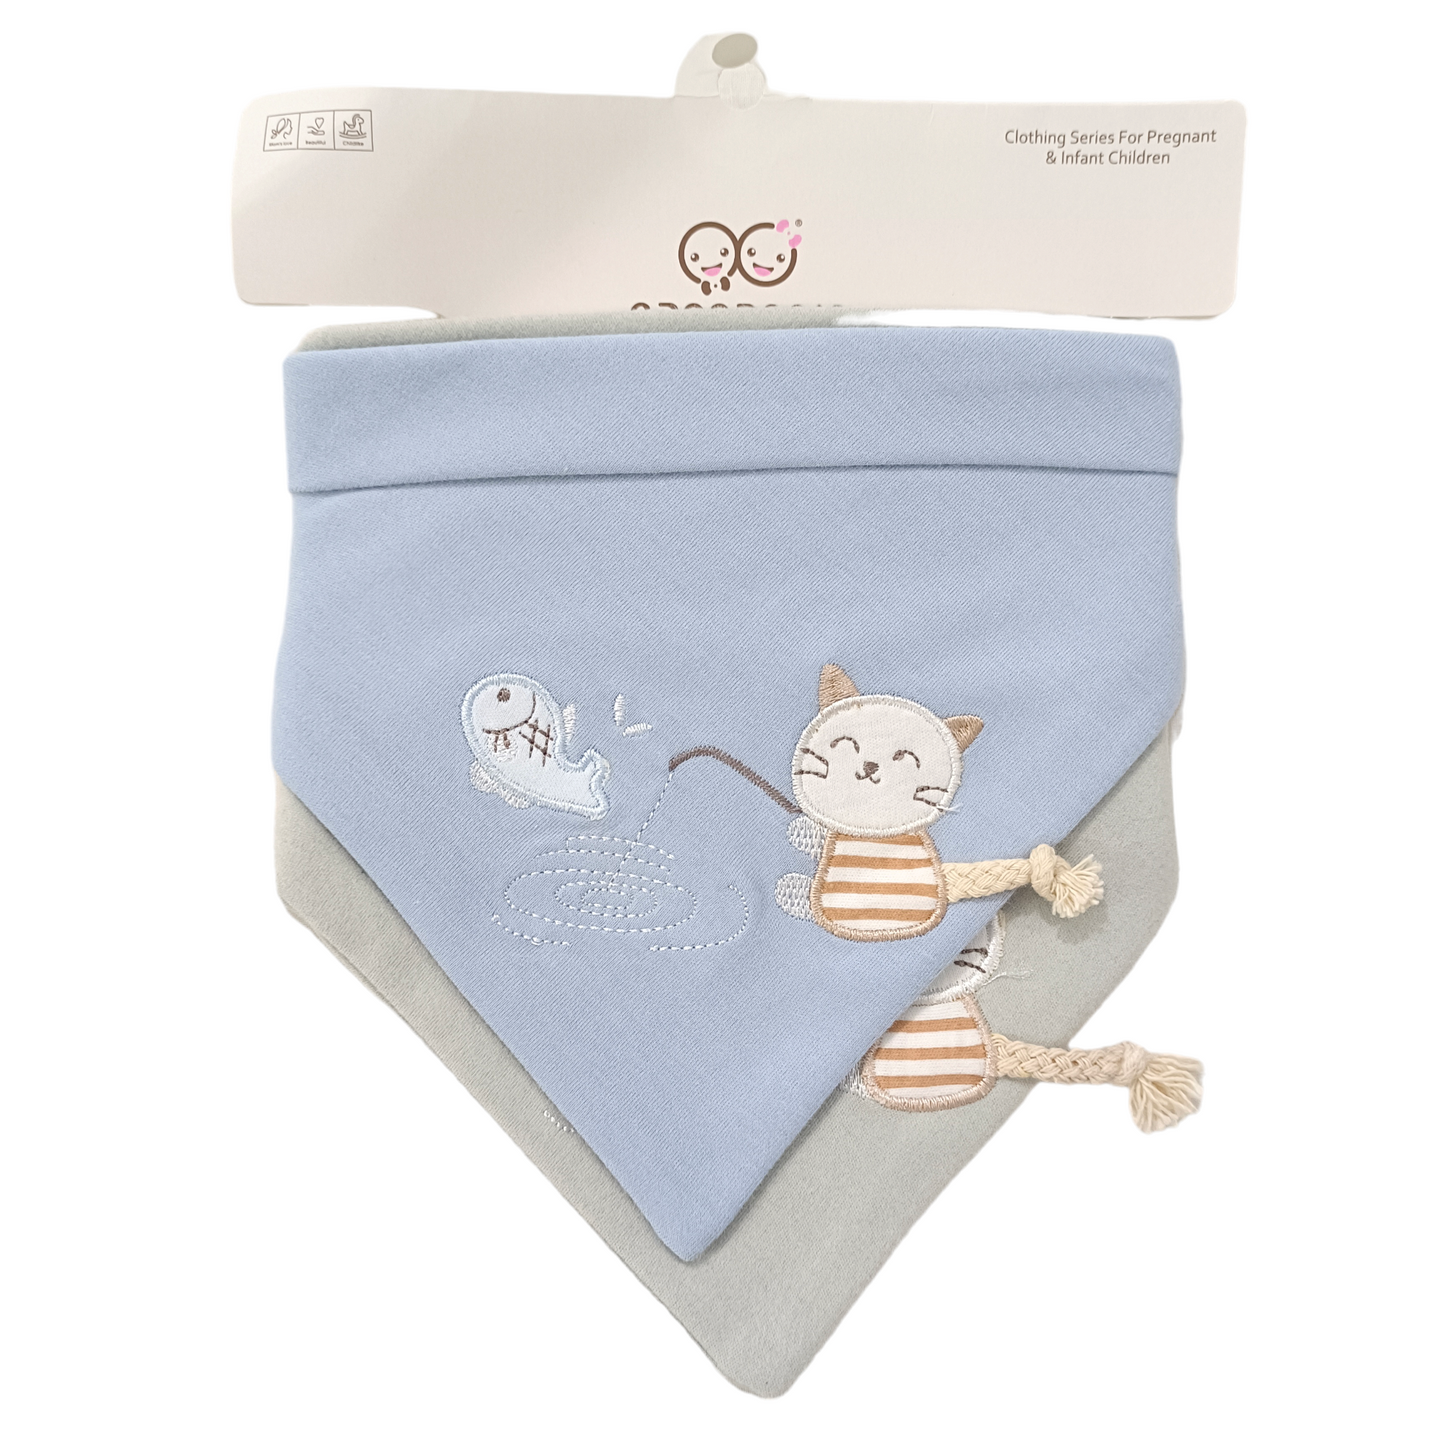 0 to 6 Months Banddana Bibs Pack of 2